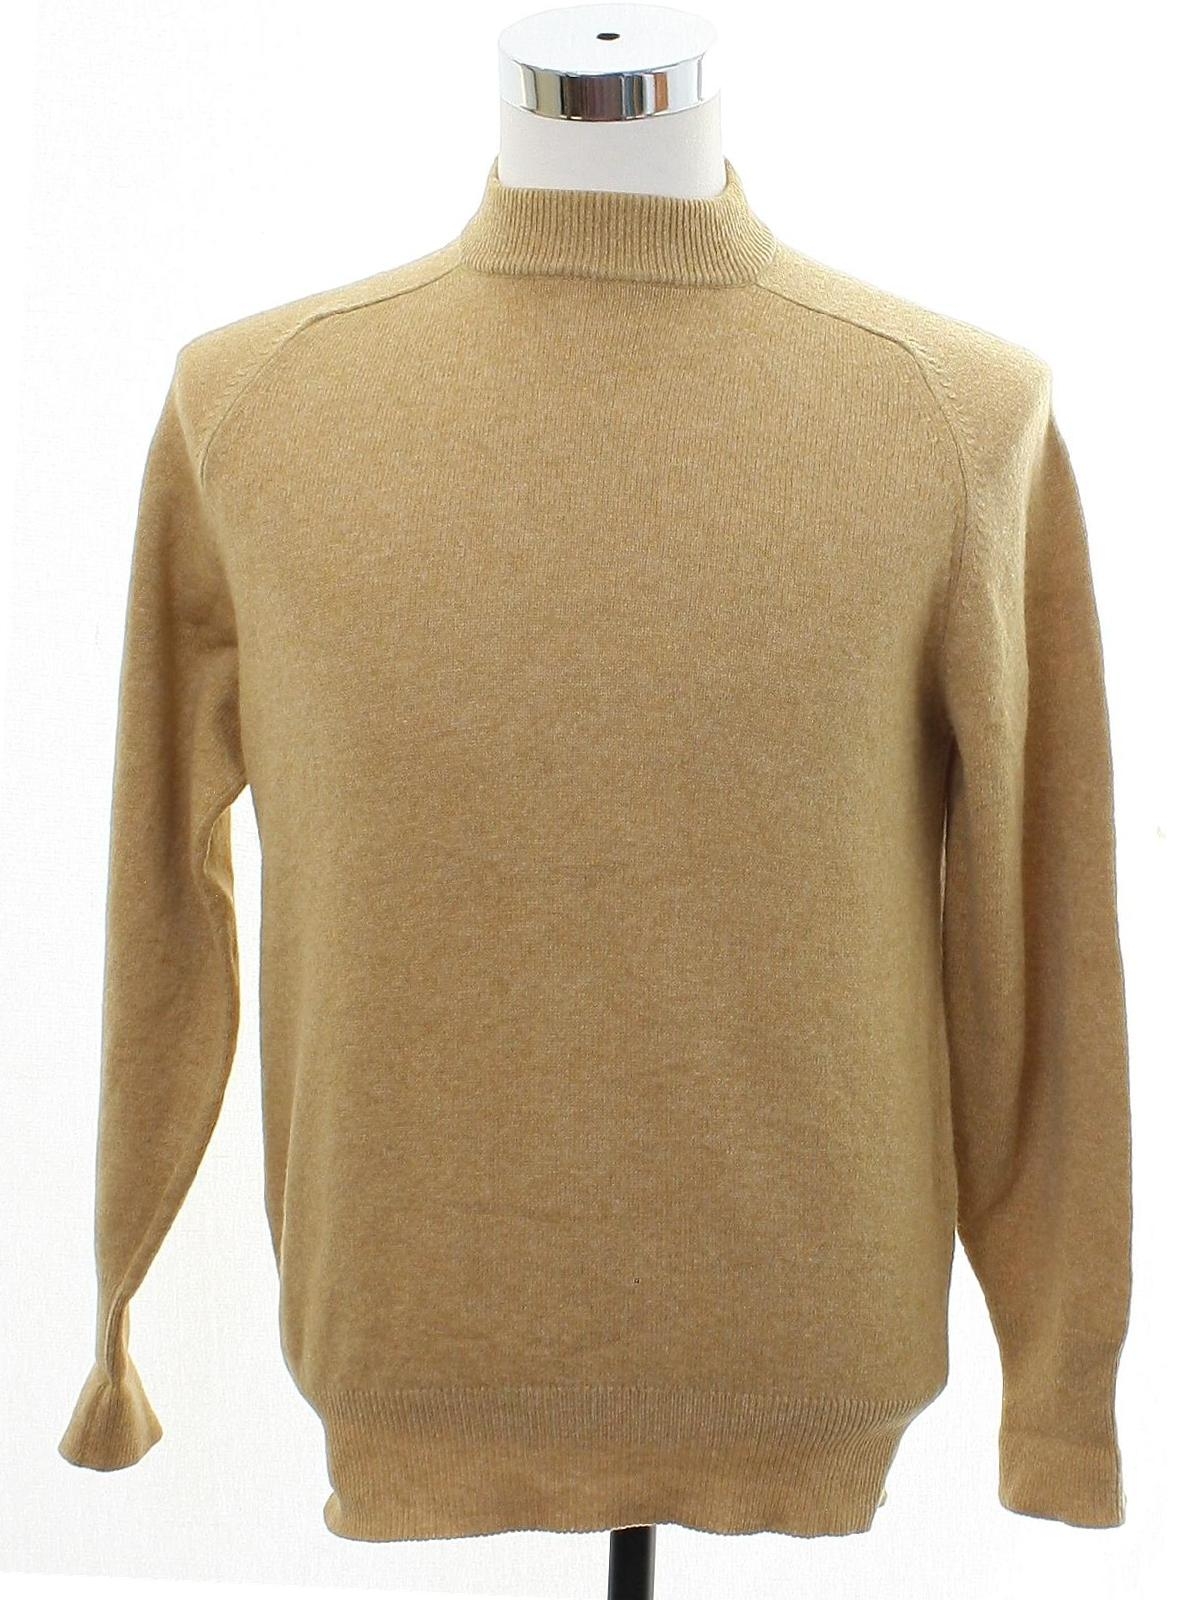 50s Retro Sweater: Late 50s or Early 60s -Kenneth Rotner Bloomingdales ...